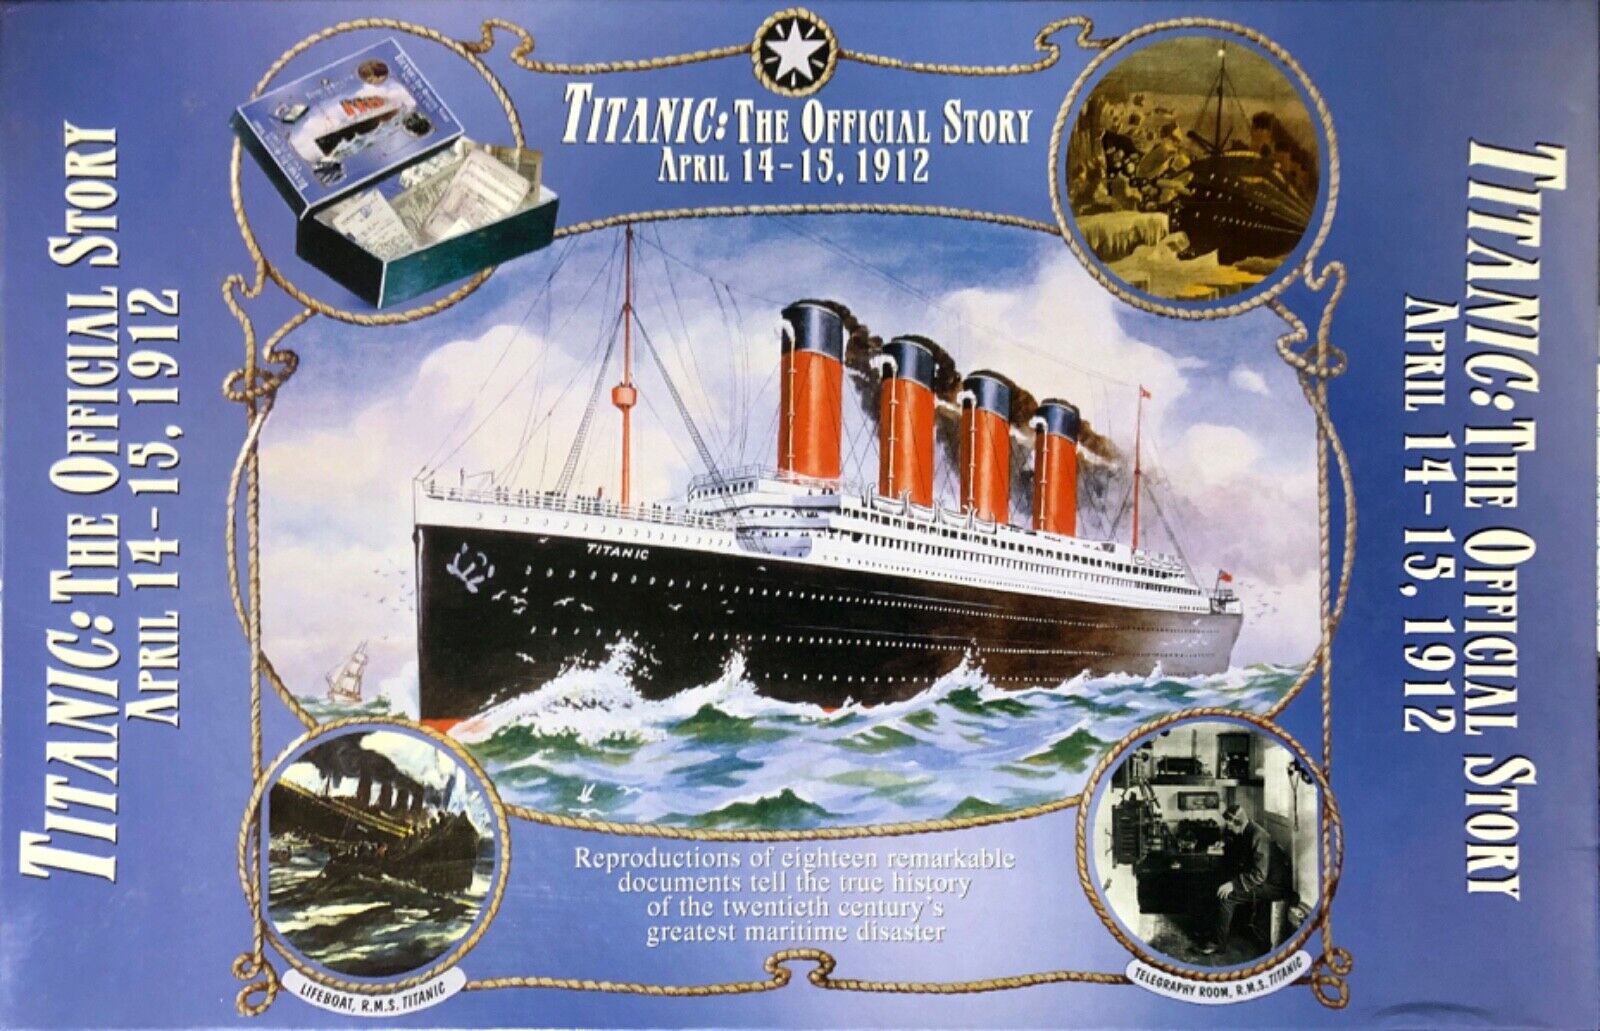 TITANIC: THE OFFICIAL STORY – Repros of information and photos of Investigation